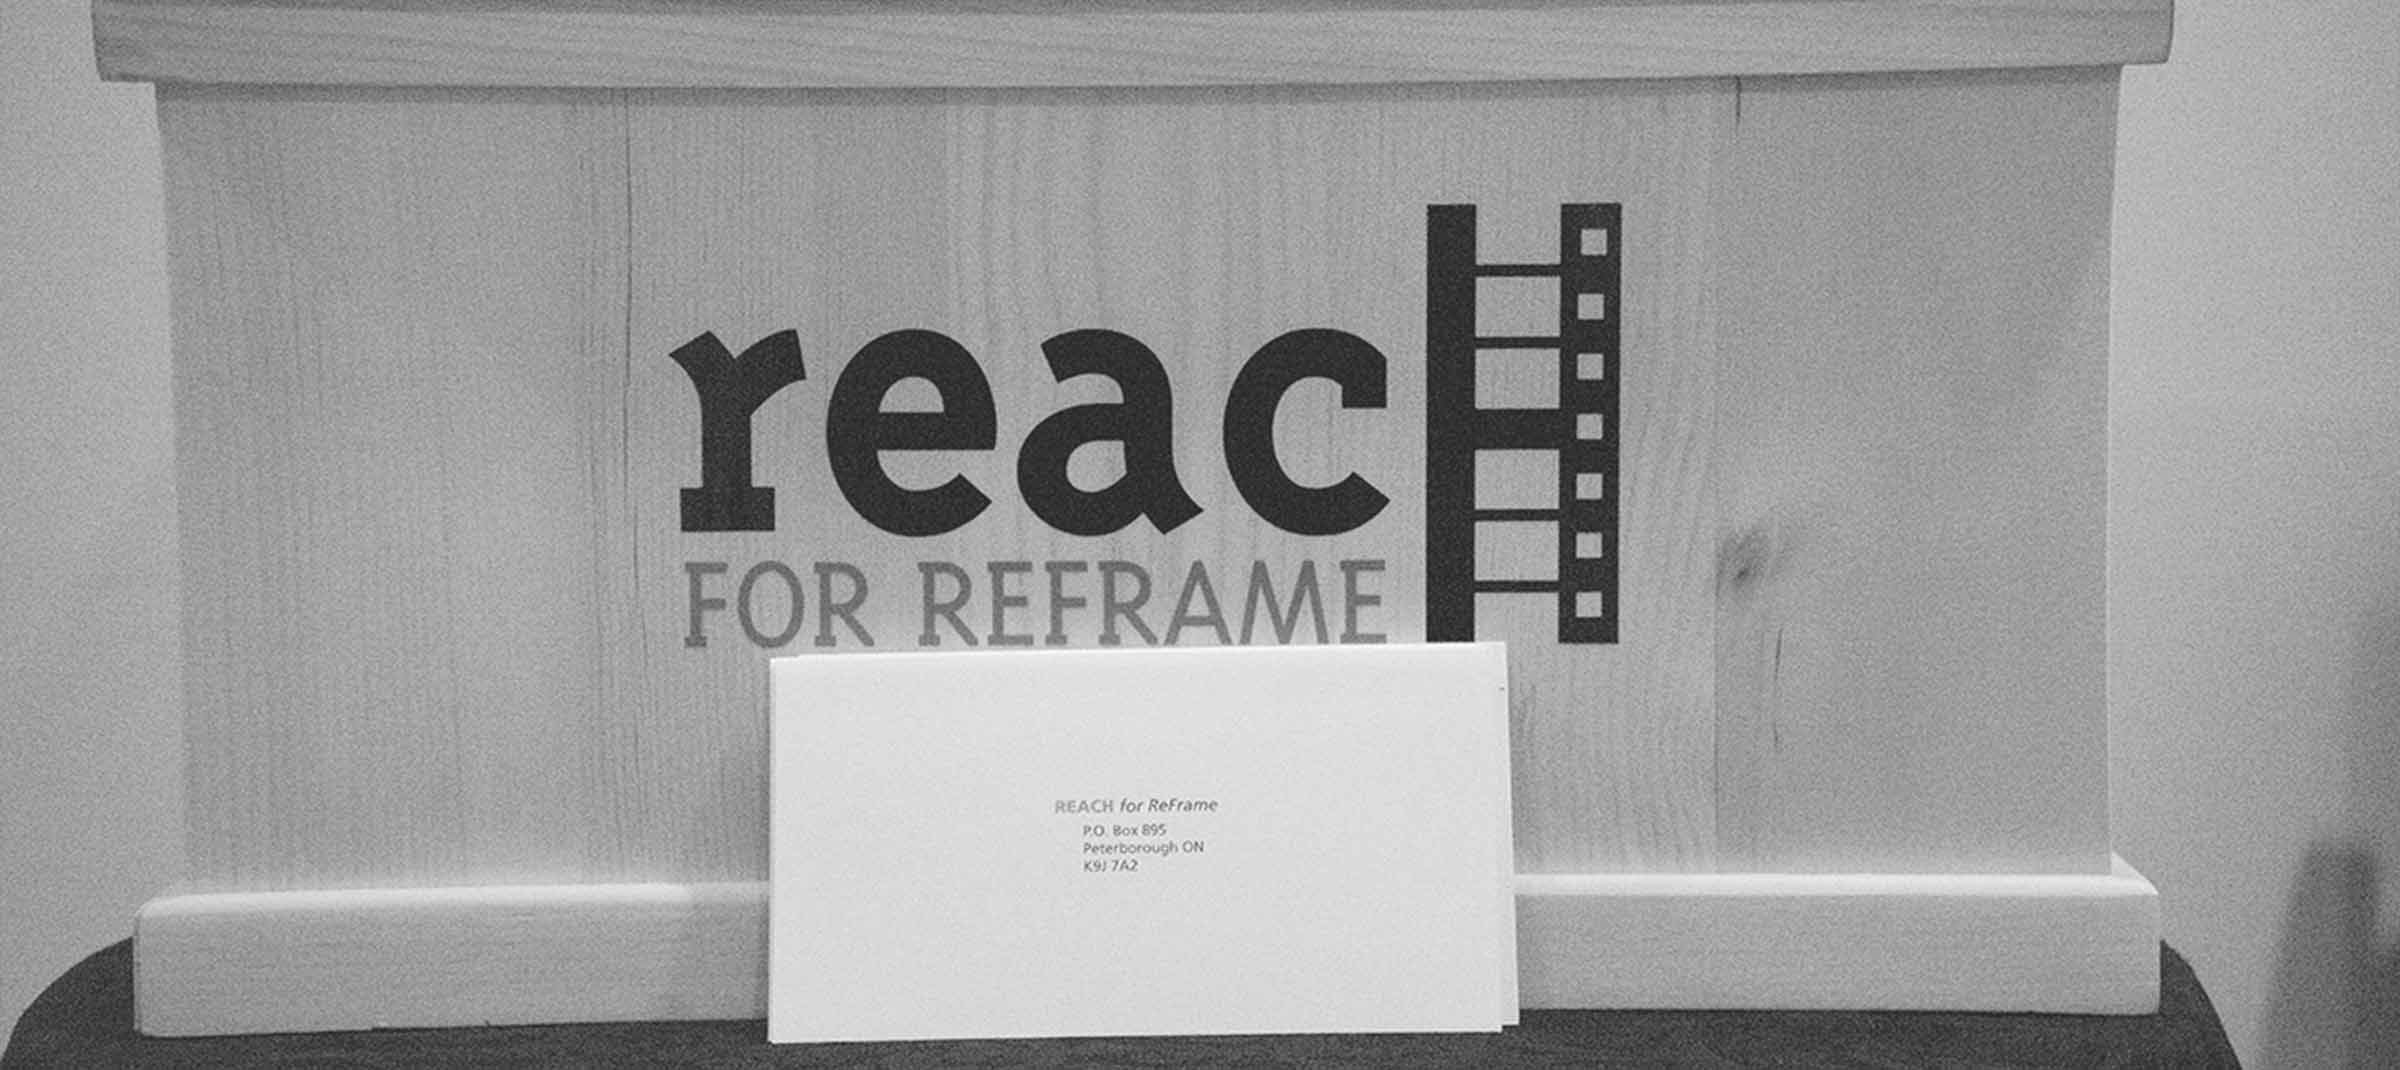 Background Image: Reach for ReFrame donation box